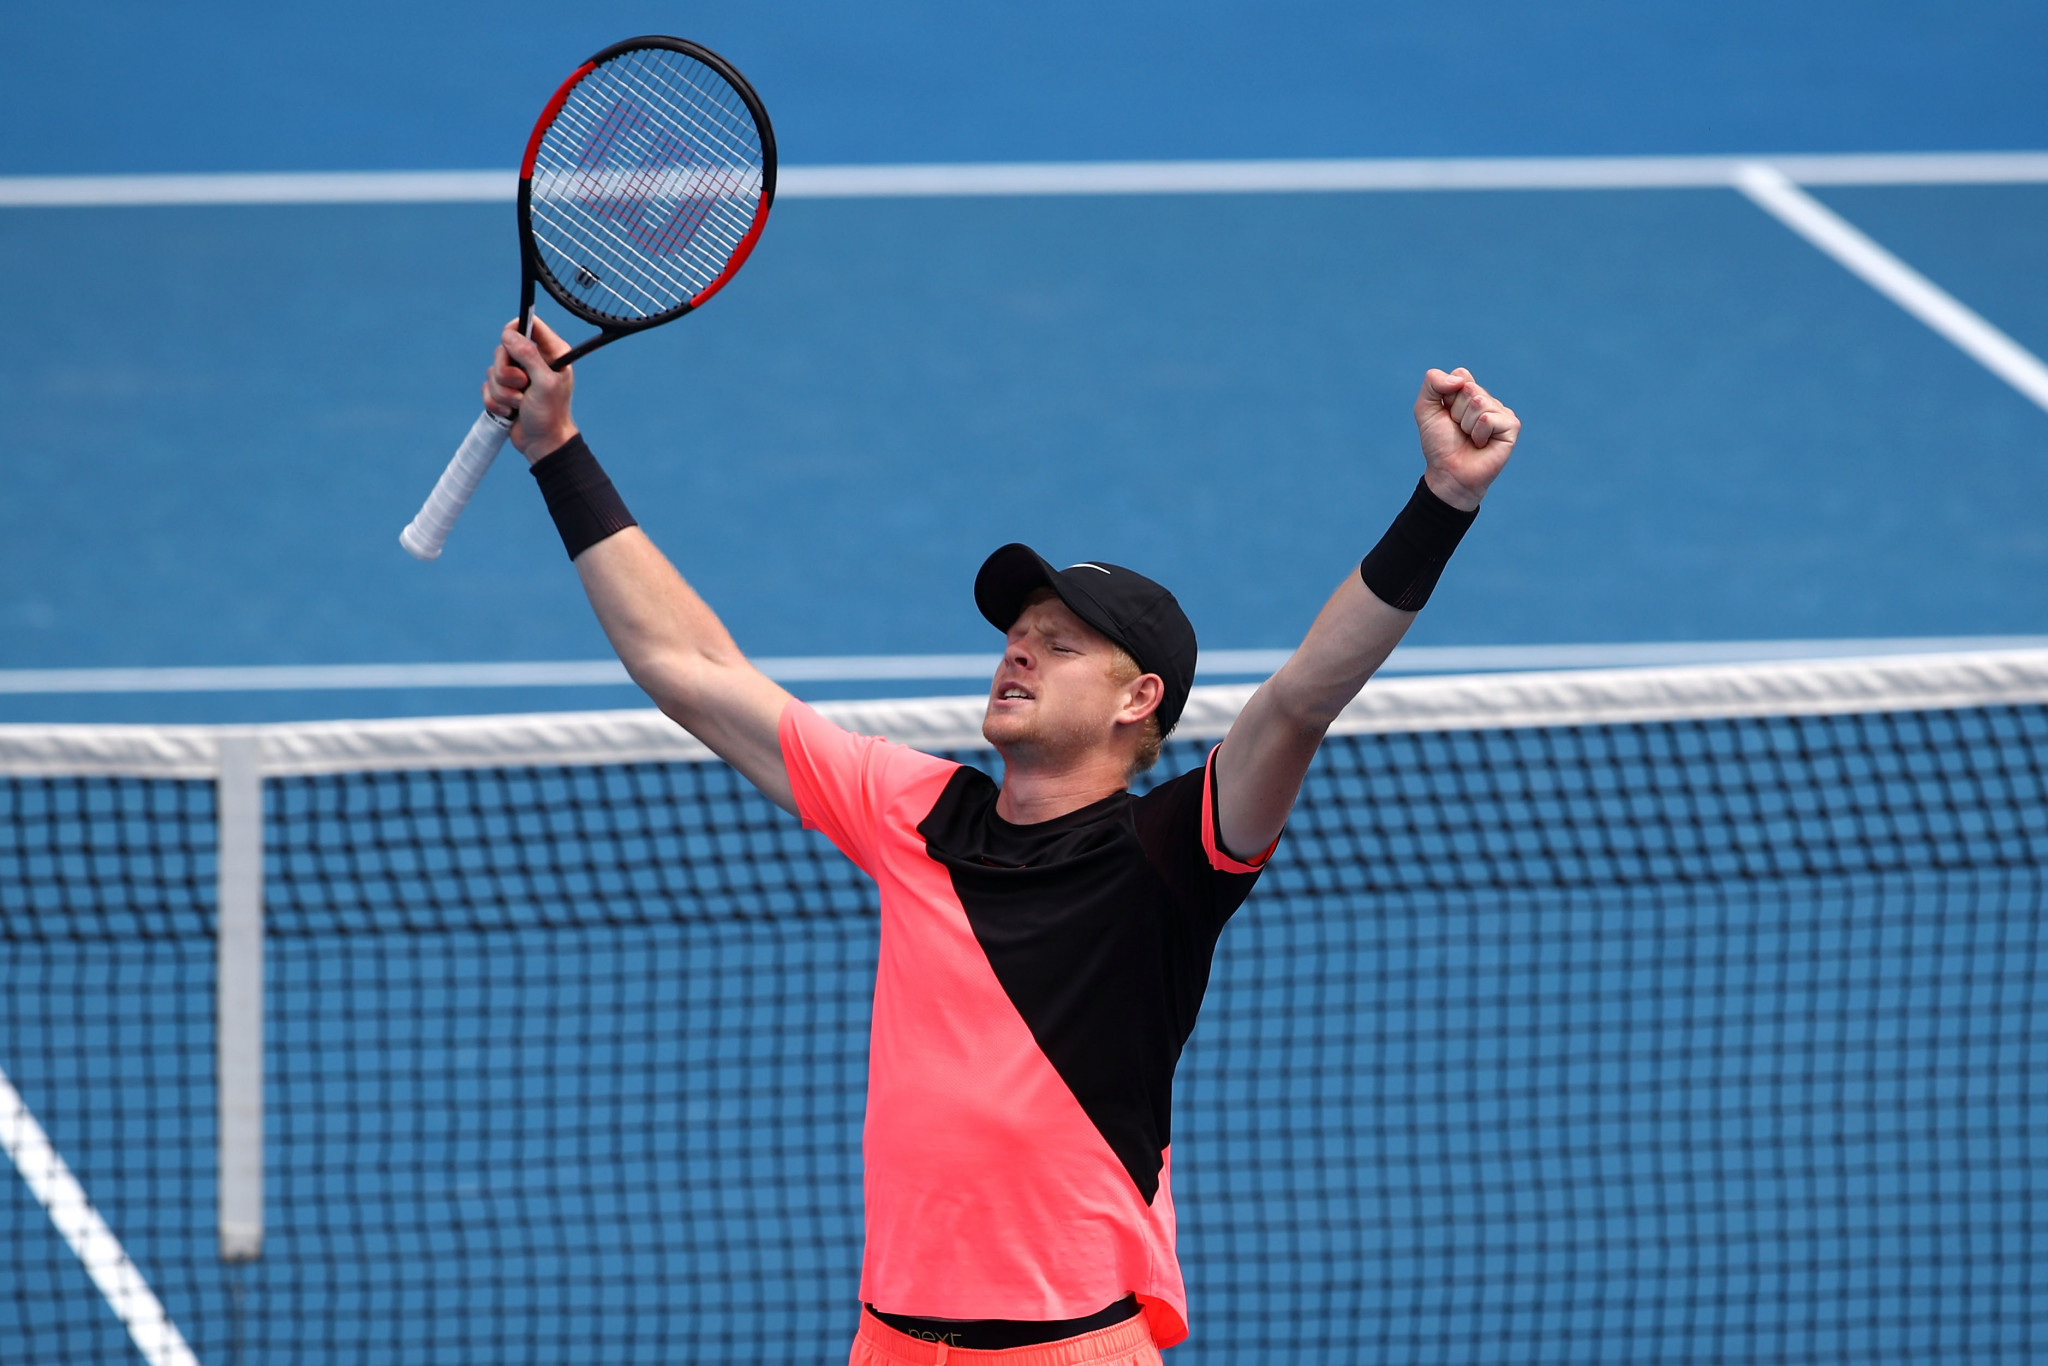 Britain's Kyle Edmund won a five-set epic against Kevin Anderson of South Africa ©Getty Images